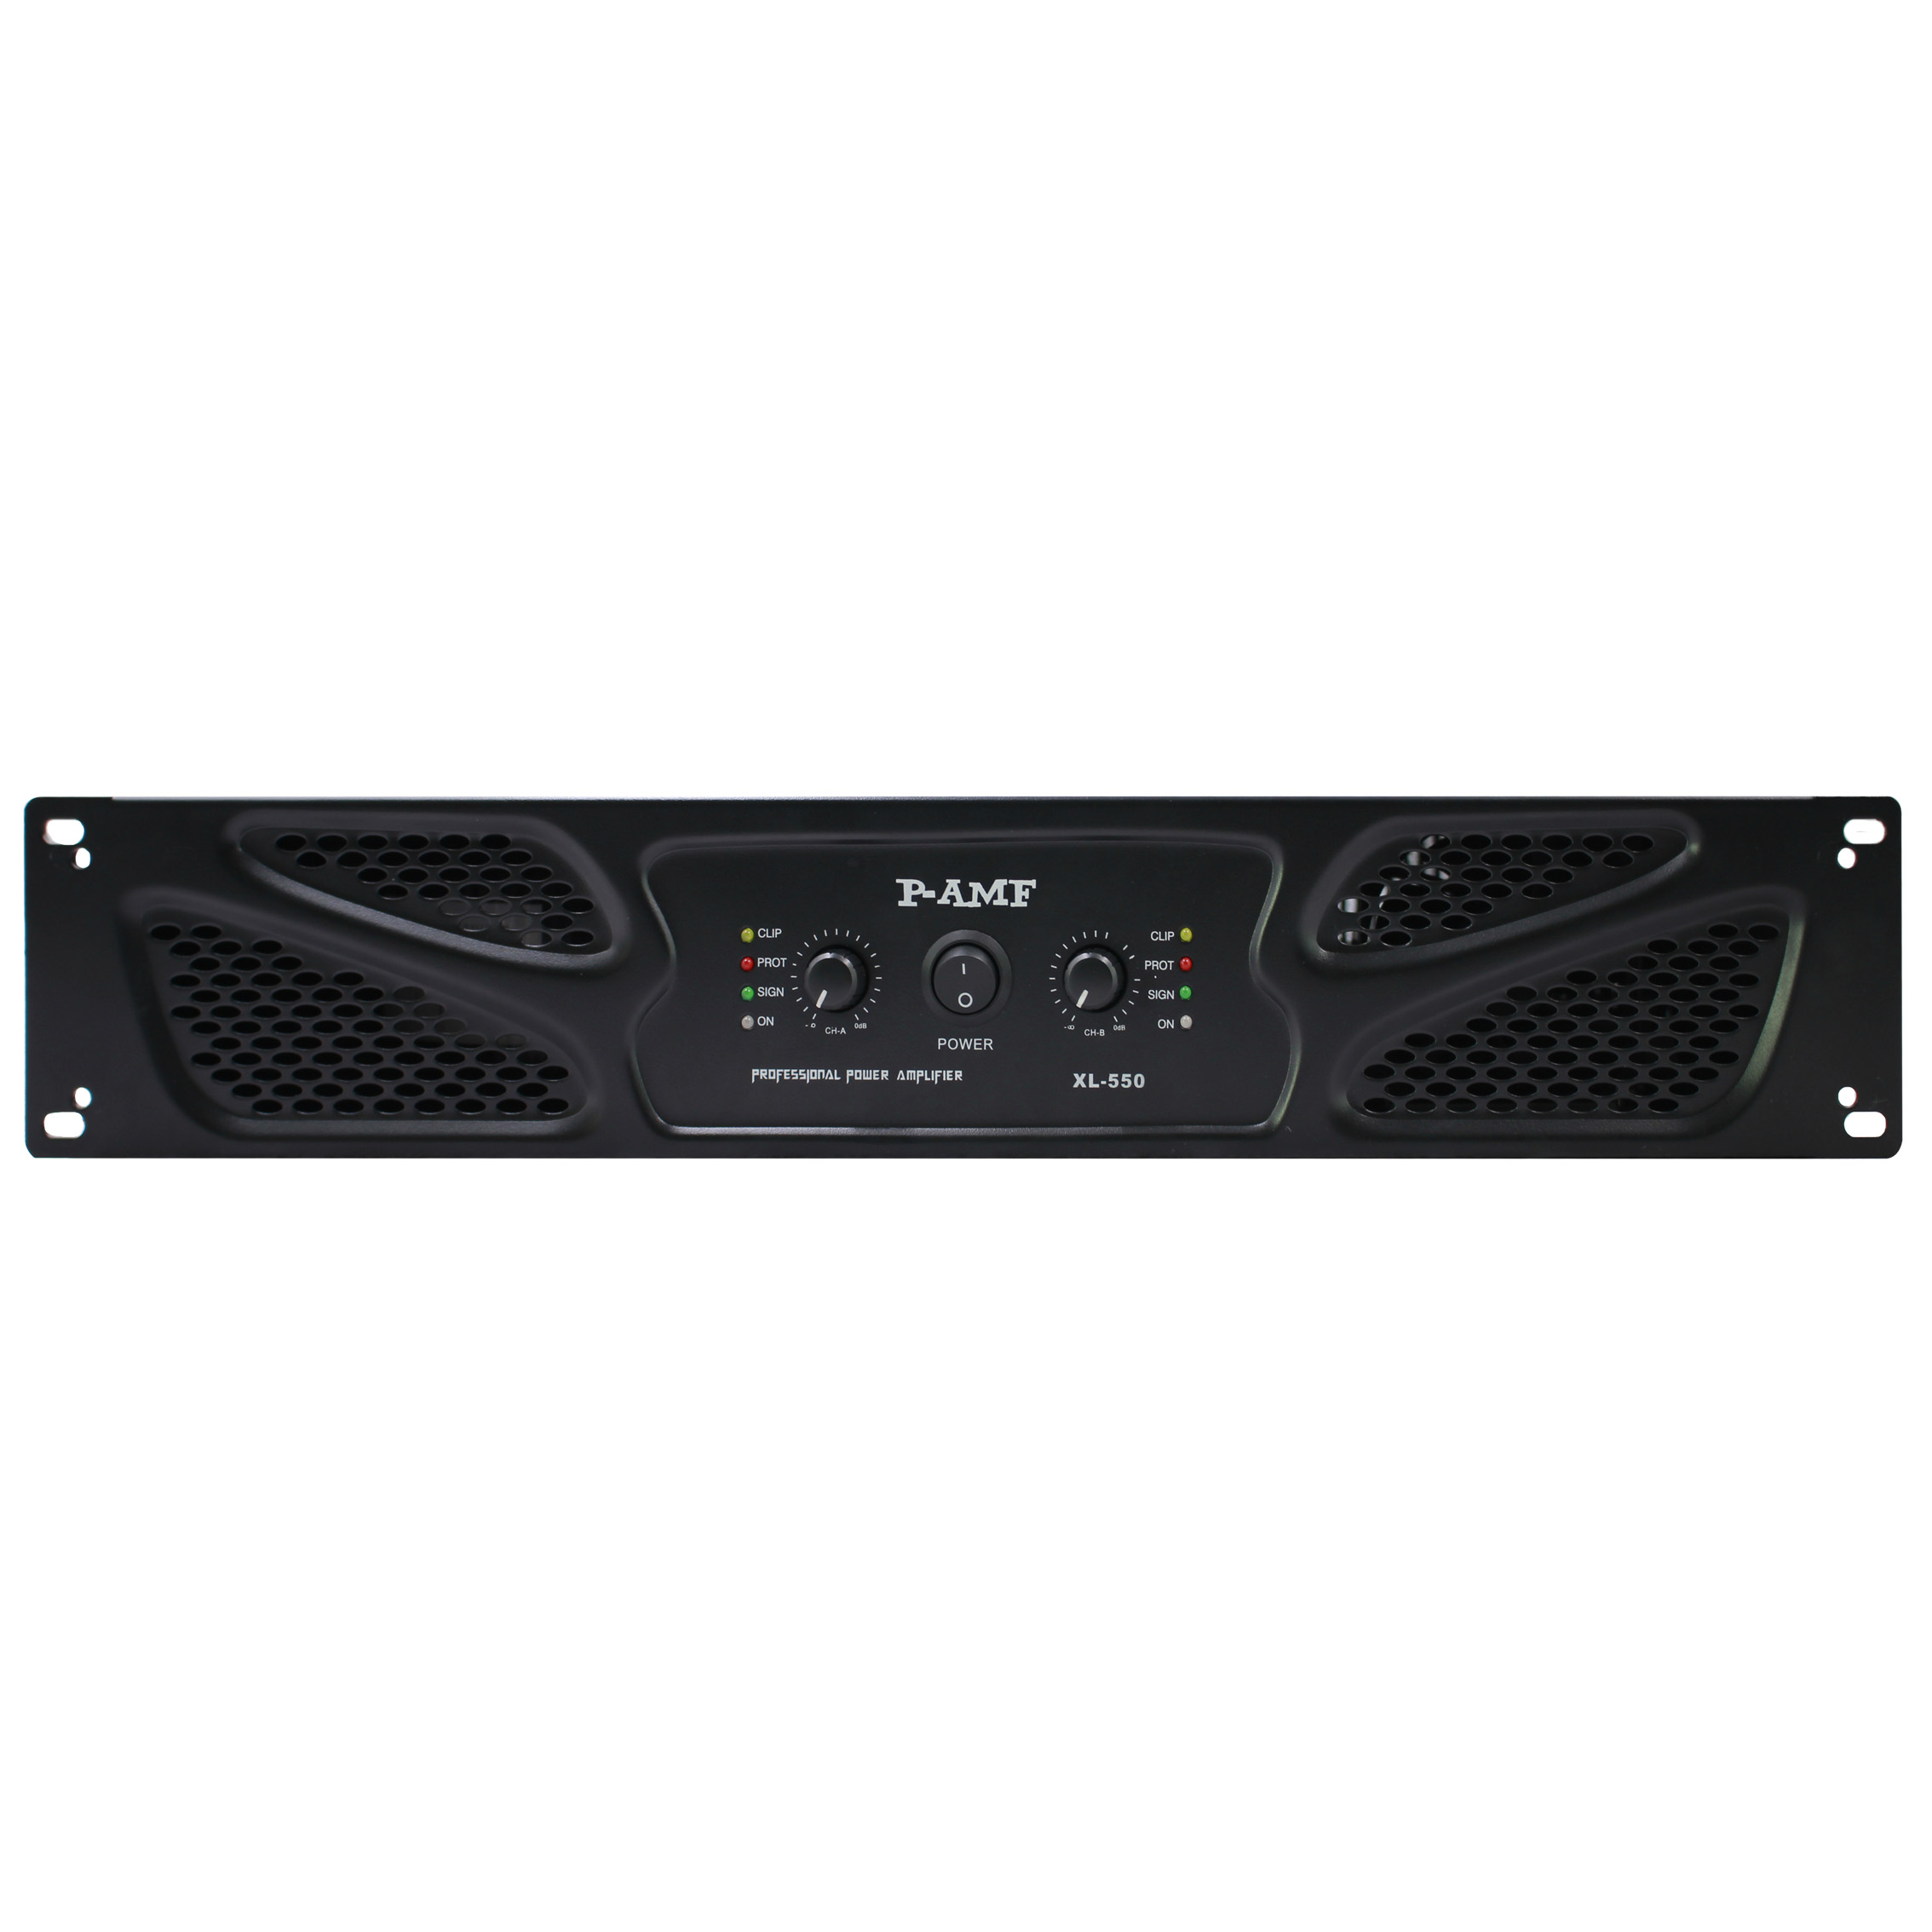 Professional Power Amplifier Two-Channel XL Series  from 2 X 350W to 2 X 550W